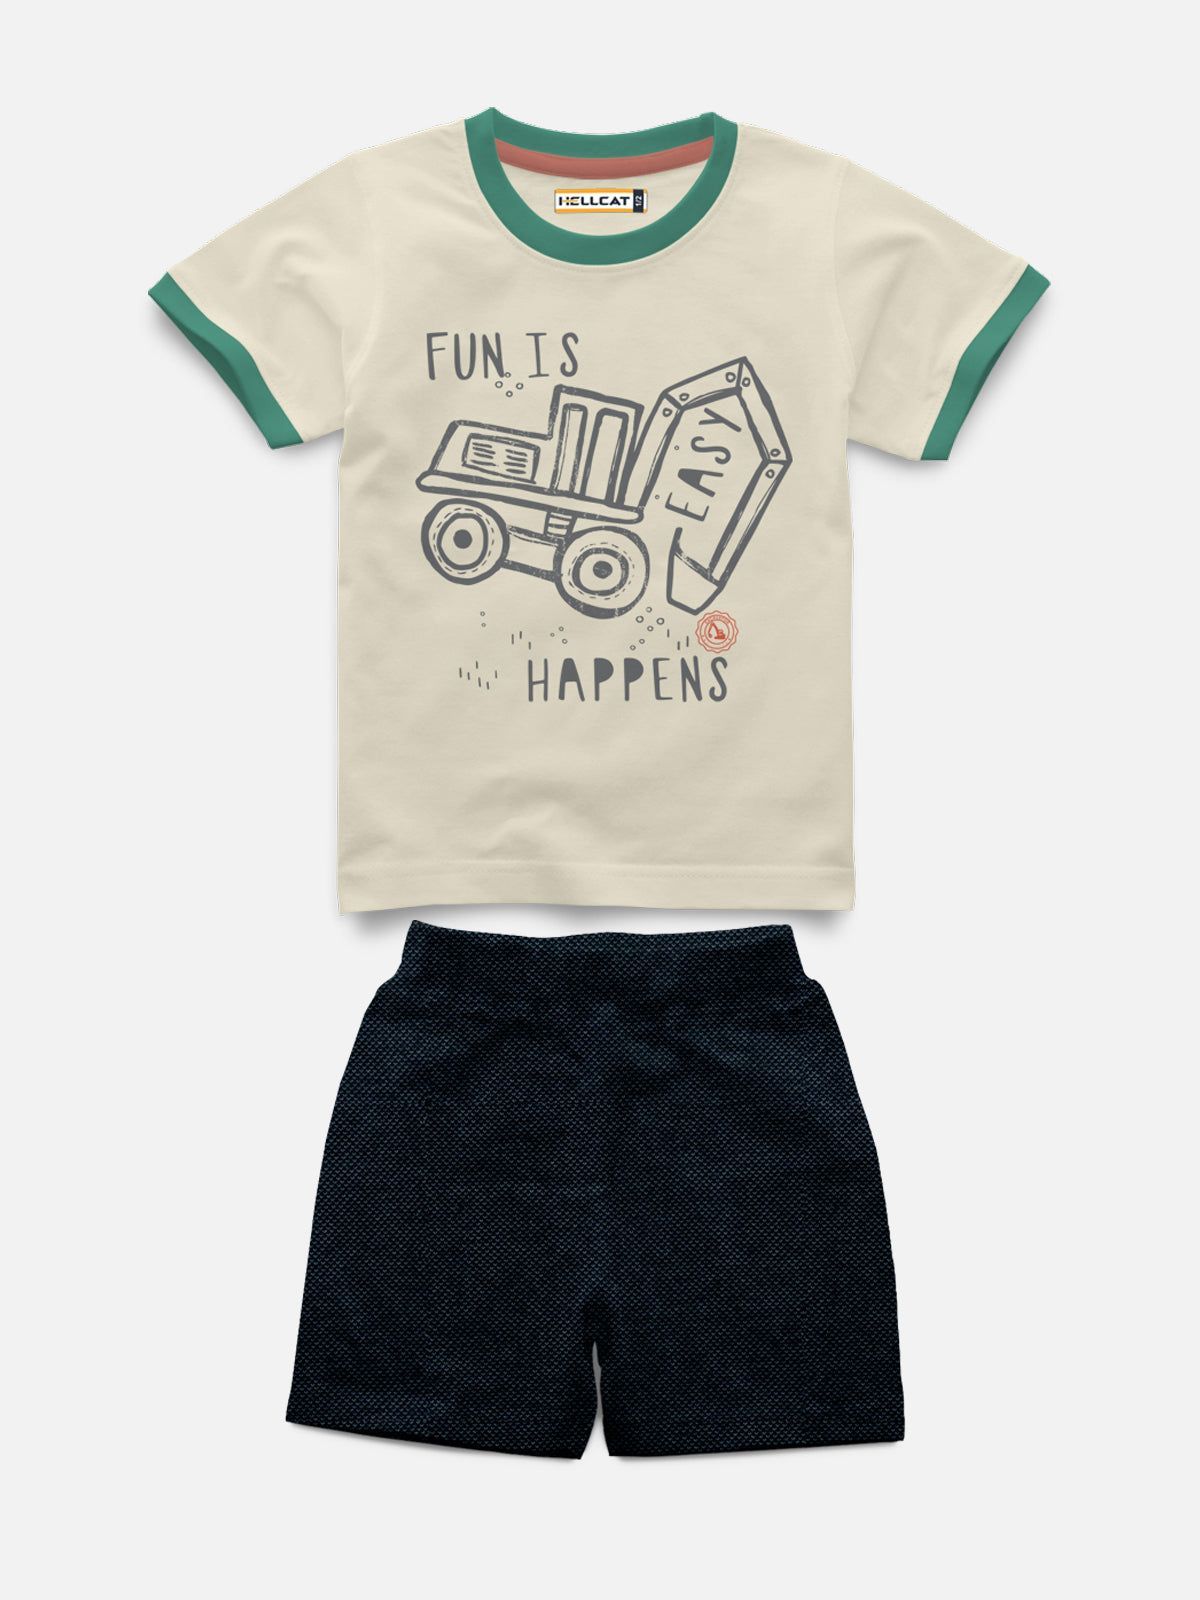 Half Sleeve With Rib Printed T-shirt with Comfy Solid Shorts for Infants & Girls - Pack of 2 (1 T-shirt & 1 short)